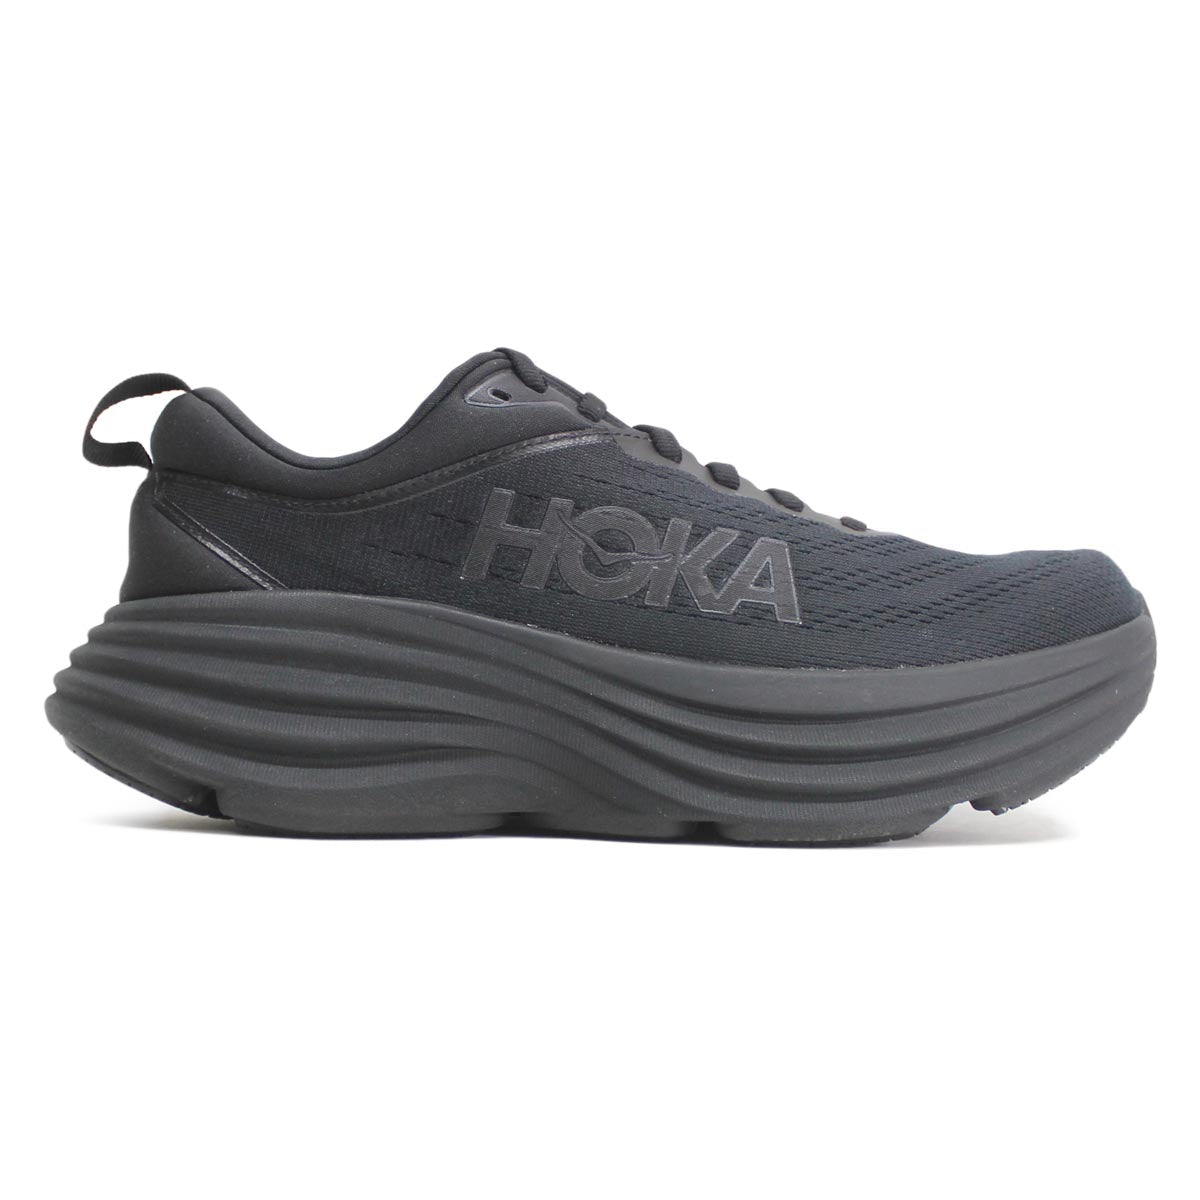 Hoka One One Womens Trainers Bondi 8 Lace-Up Low-Top Running Sneakers Textile - UK 6.5